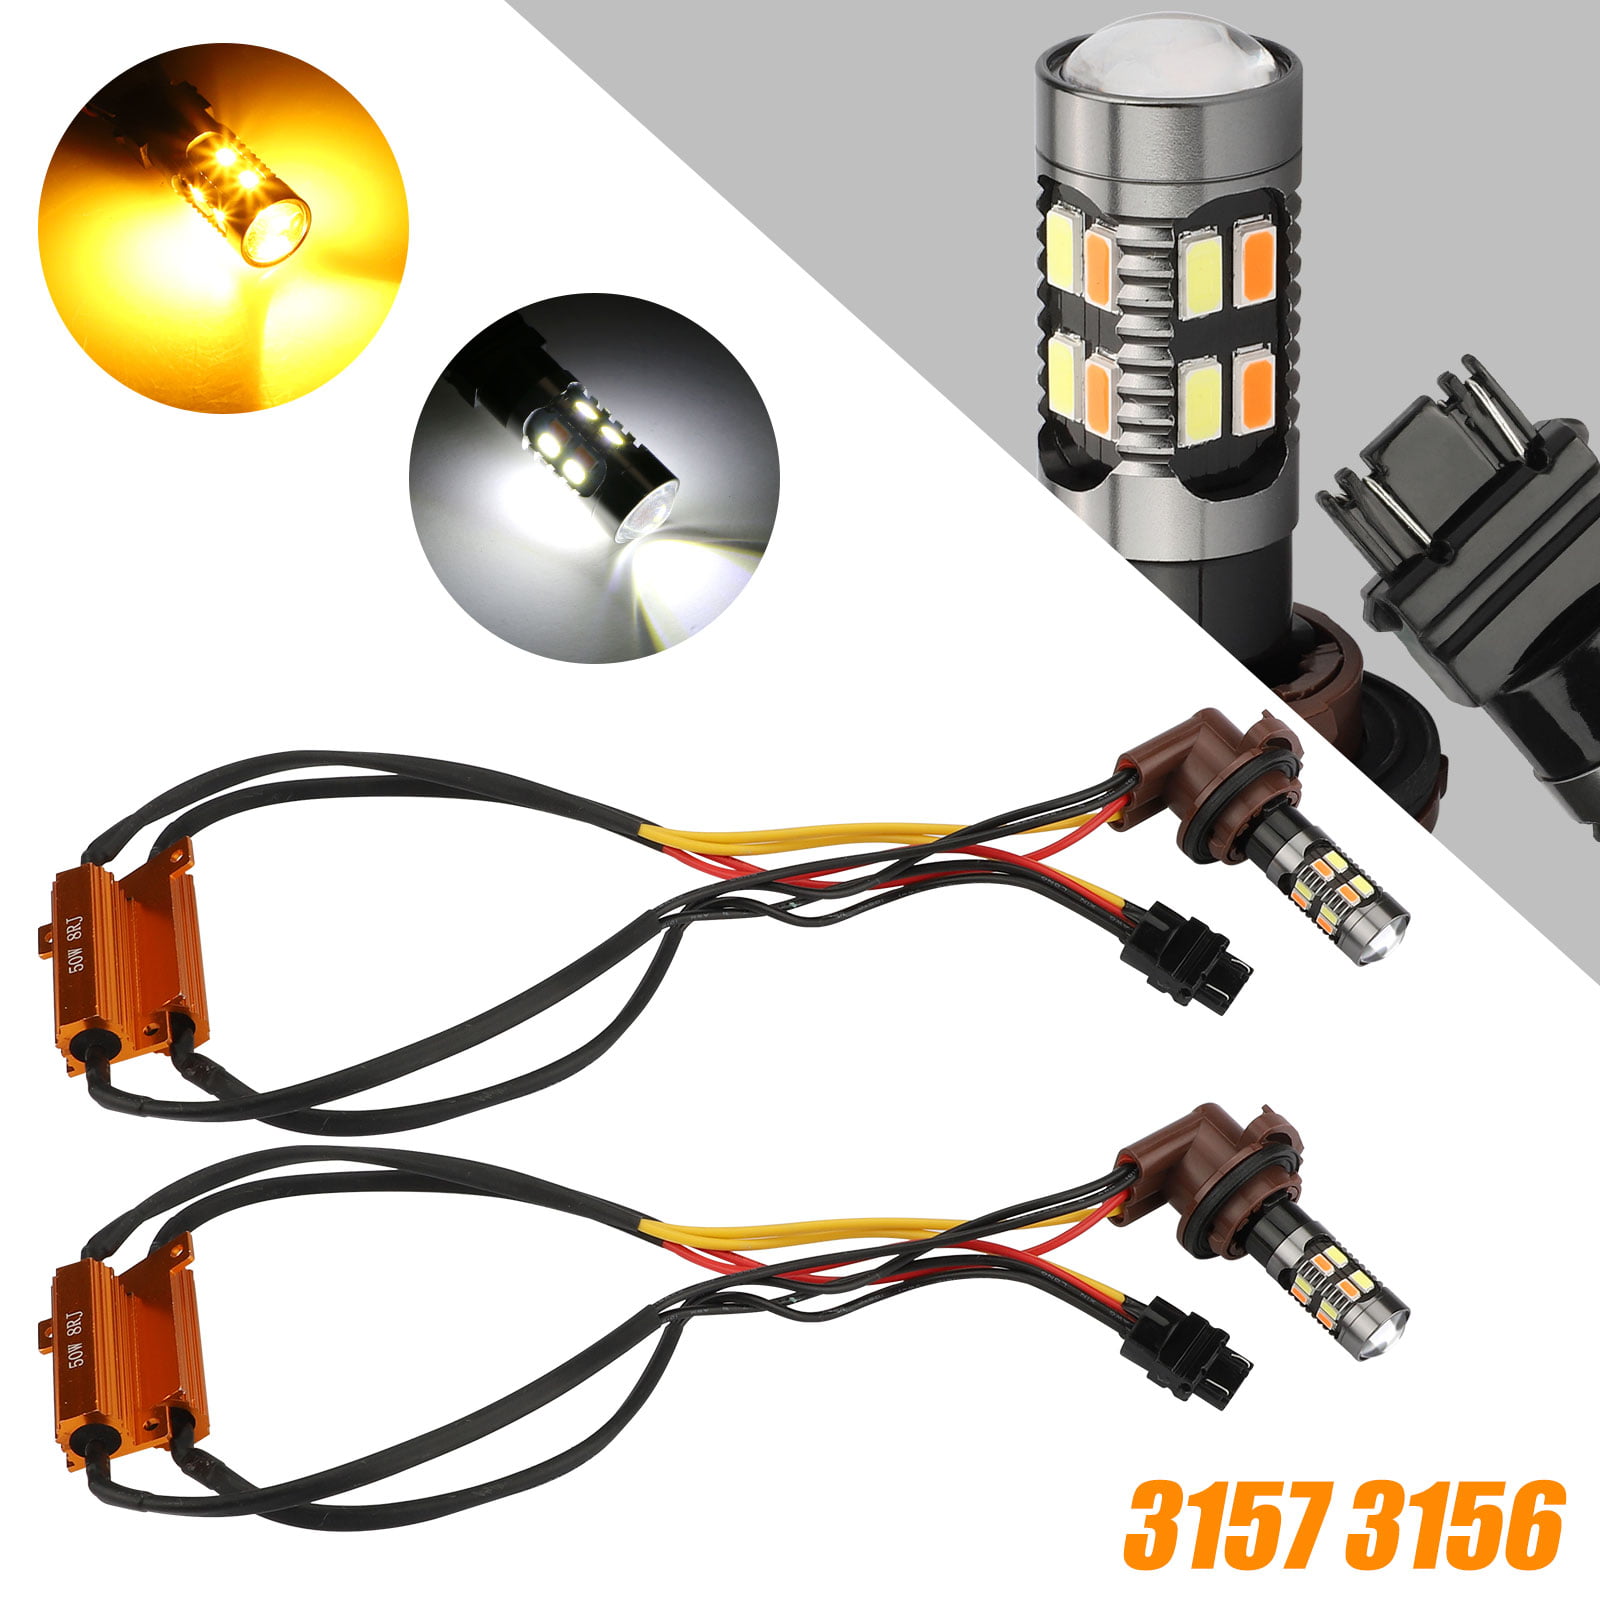 AUTOGINE 4 X Super Bright 9-30V 3157 3156 3057 3056 4157 LED Bulbs 3014 54-EX Chipsets with Projector for Turn Signal Lights Sidemarker Lights Amber Yellow 